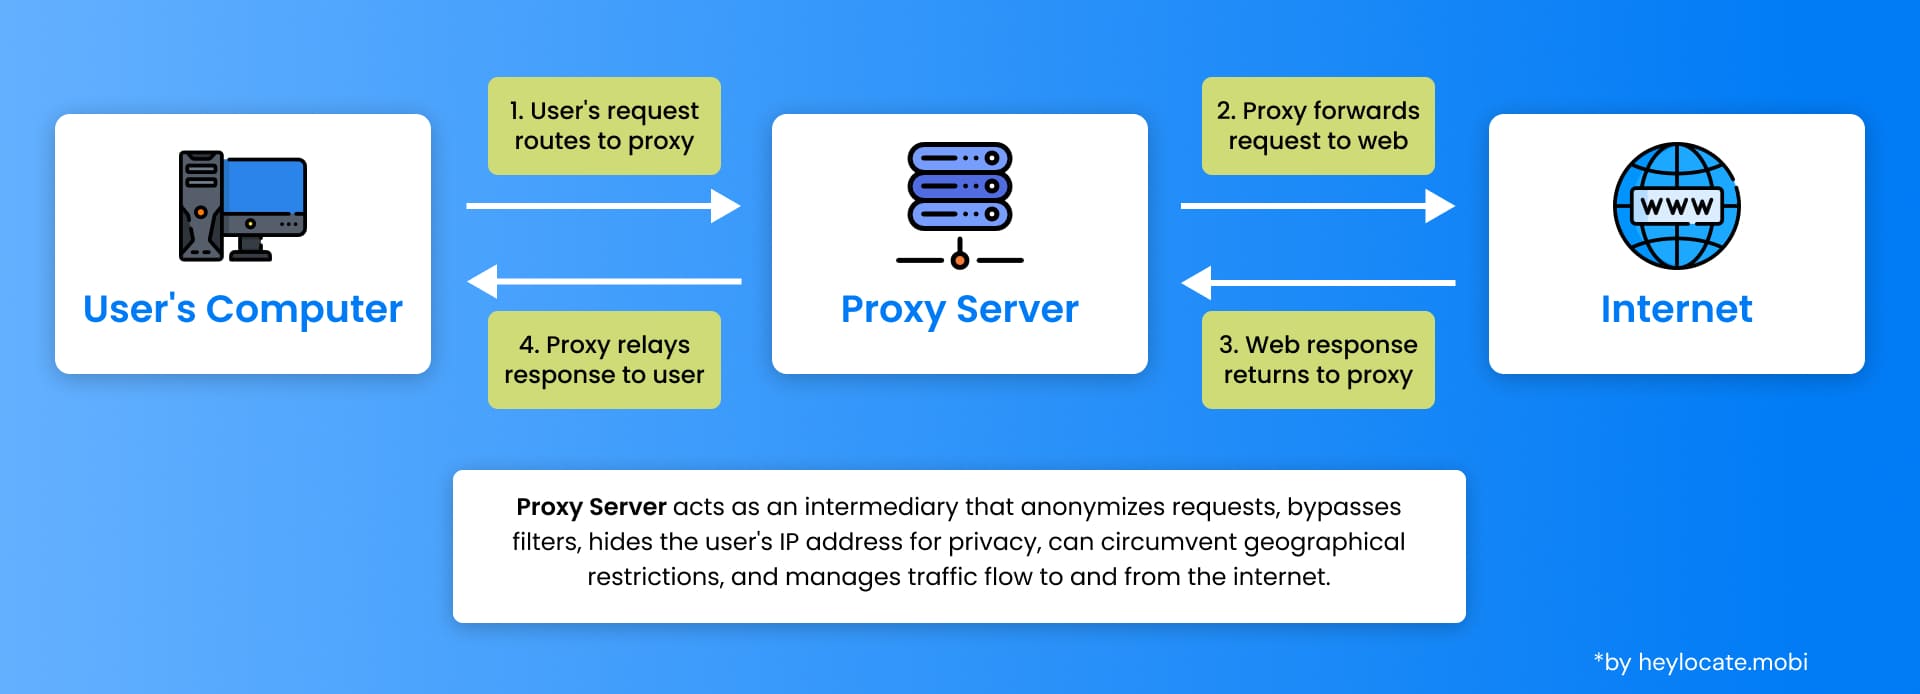 A flowchart illustrating the role of a proxy server in processing a user's request to the internet, detailing the steps from the user's computer to the web and back